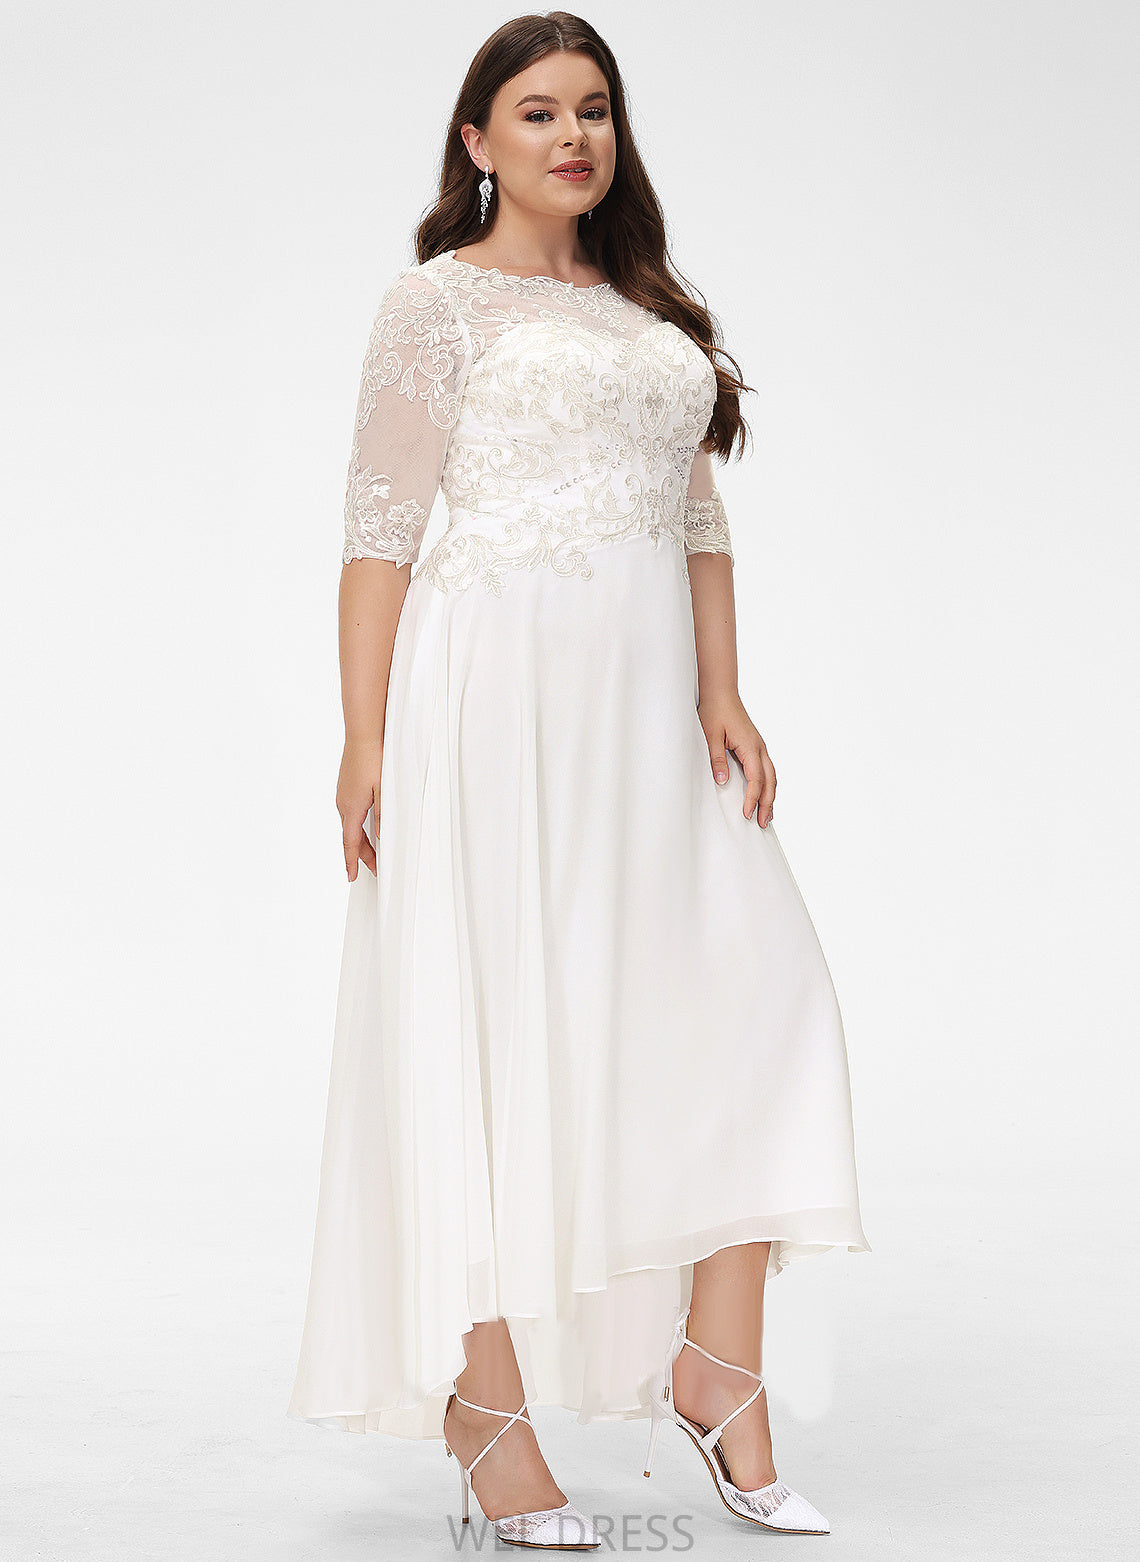 Lace Asymmetrical Scoop Chiffon Beading Dress Wedding Dresses Kailyn A-Line With Wedding Sequins